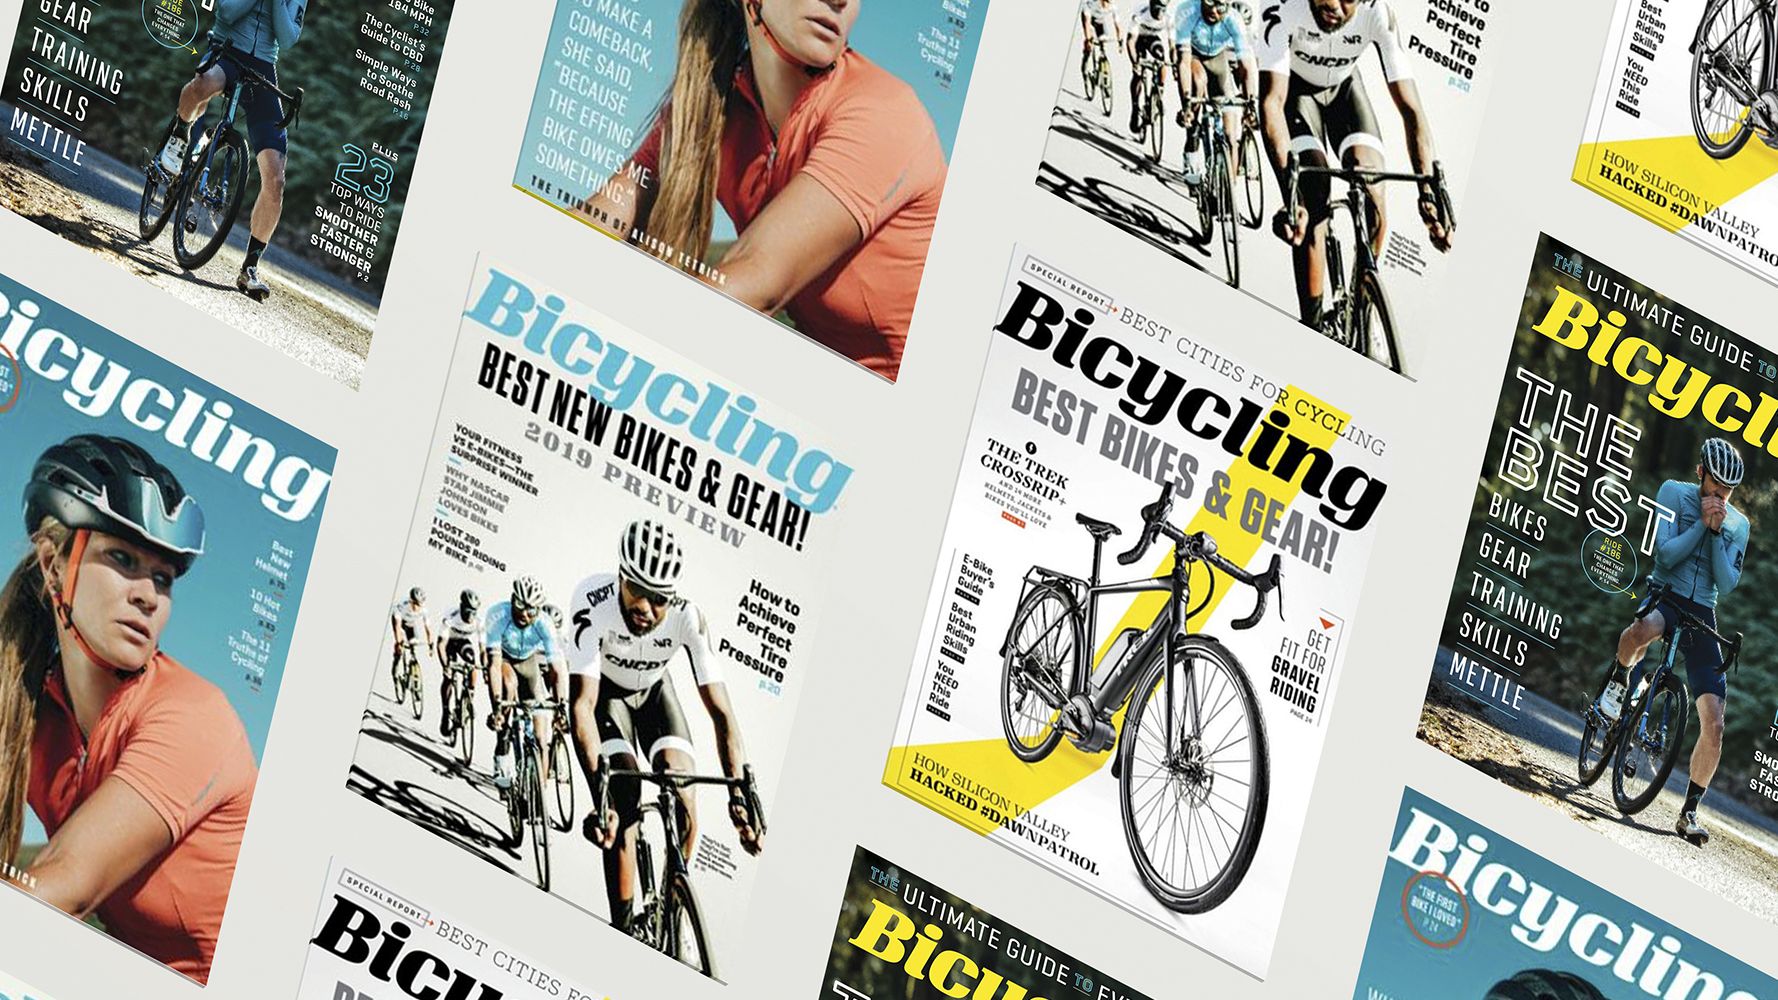 bicycling magazine covers